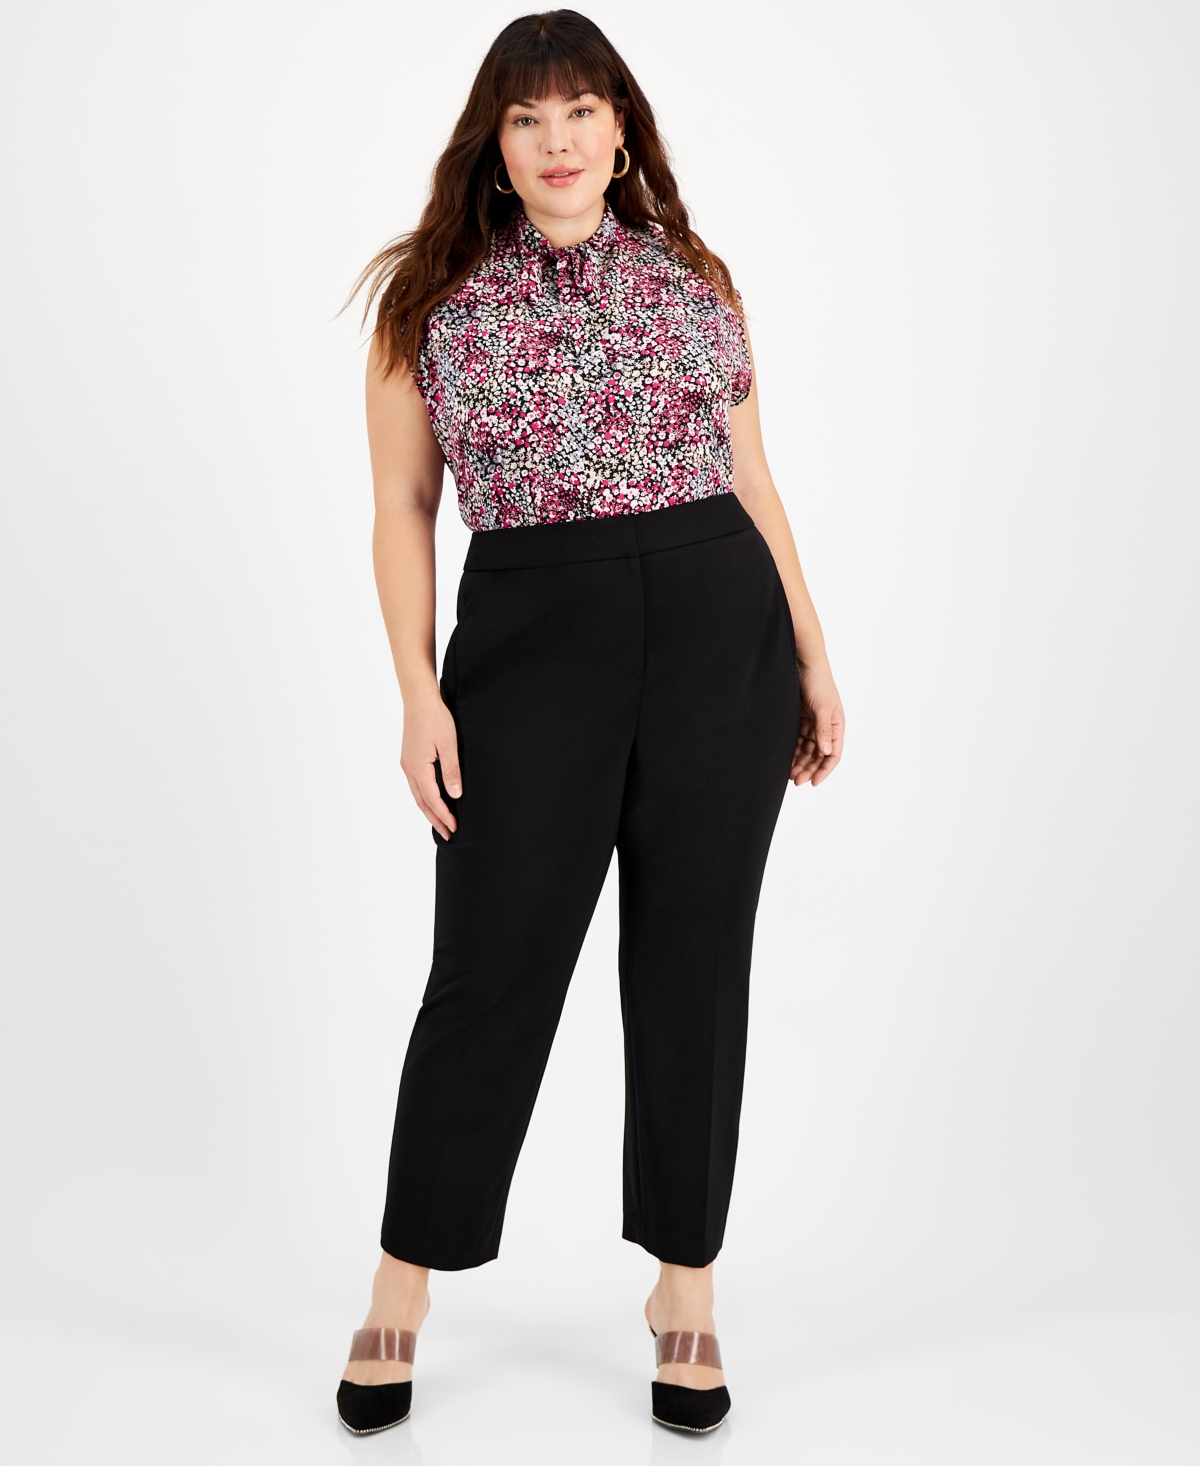 BAR III PLUS SIZE COMPRESSION STRAIGHT-LEG ANKLE PANTS, CREATED FOR MACY'S